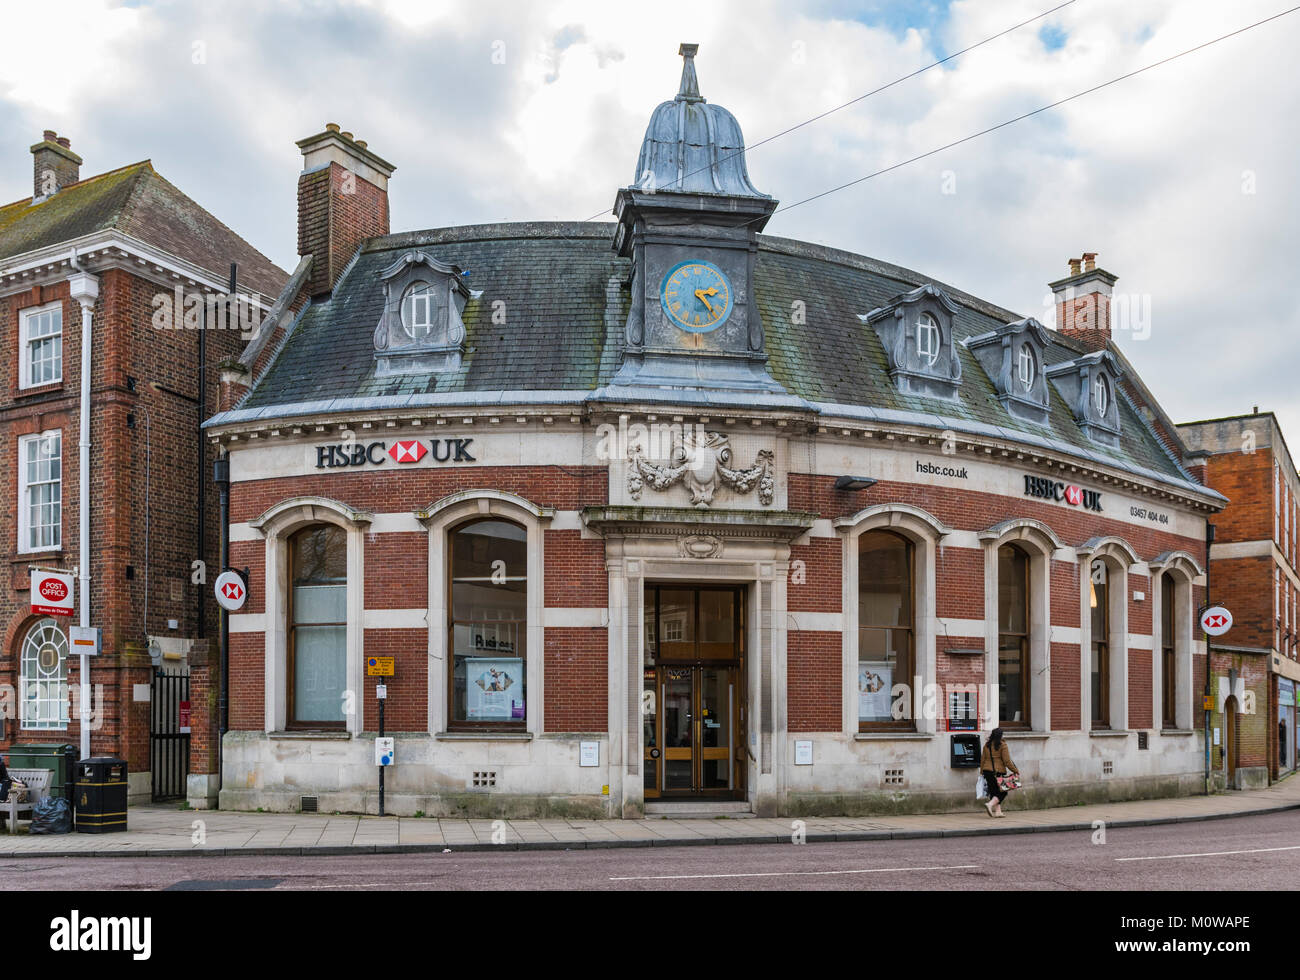 HSBC Bank front Entrance, a large historic building in Petersfield, Hampshire, England, UK. Stock Photo